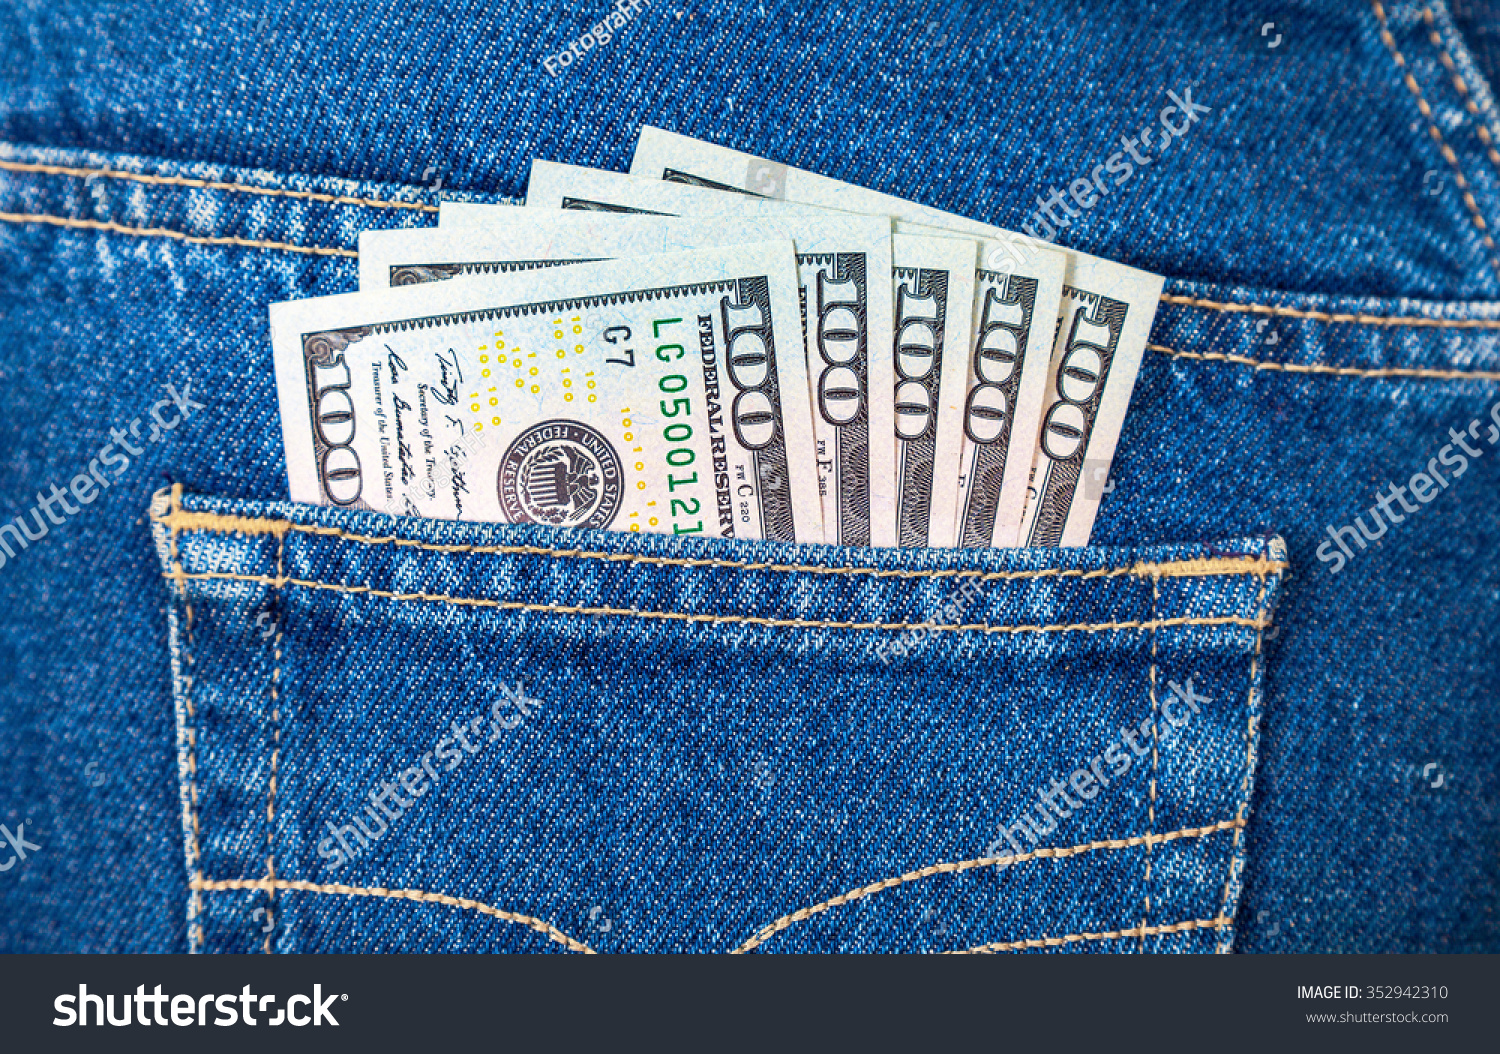 jeans that cost 1000 dollars